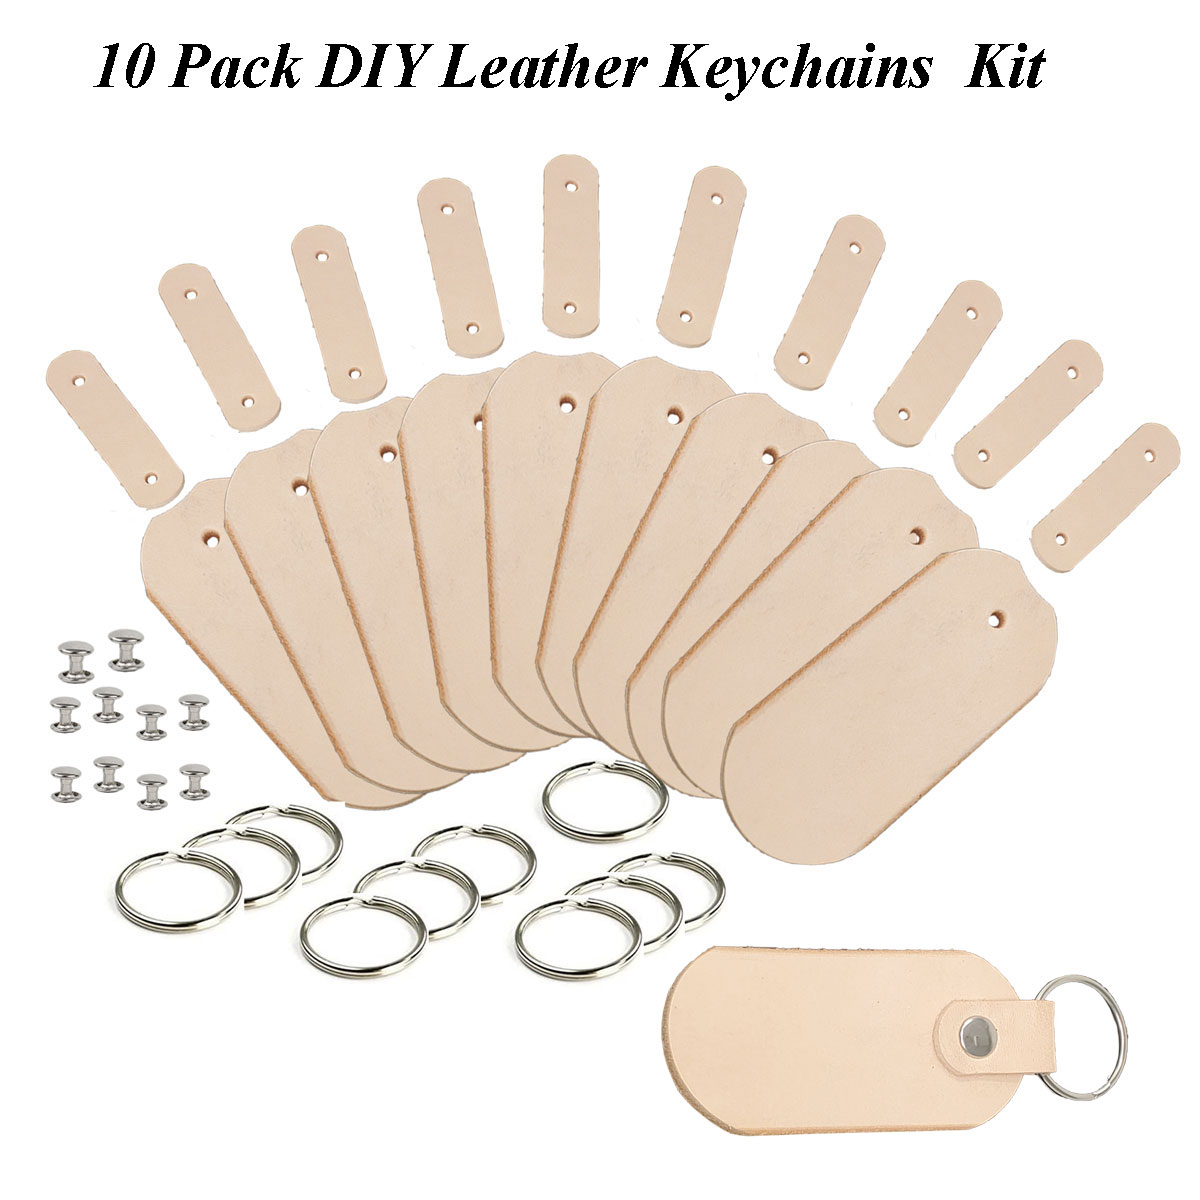 Blank Leather Keychains Pitka Leather Natural Vegetable Tanned Leather Key Fobs Decorating Ready Engraving 8 Pack Keyrings Stamping 